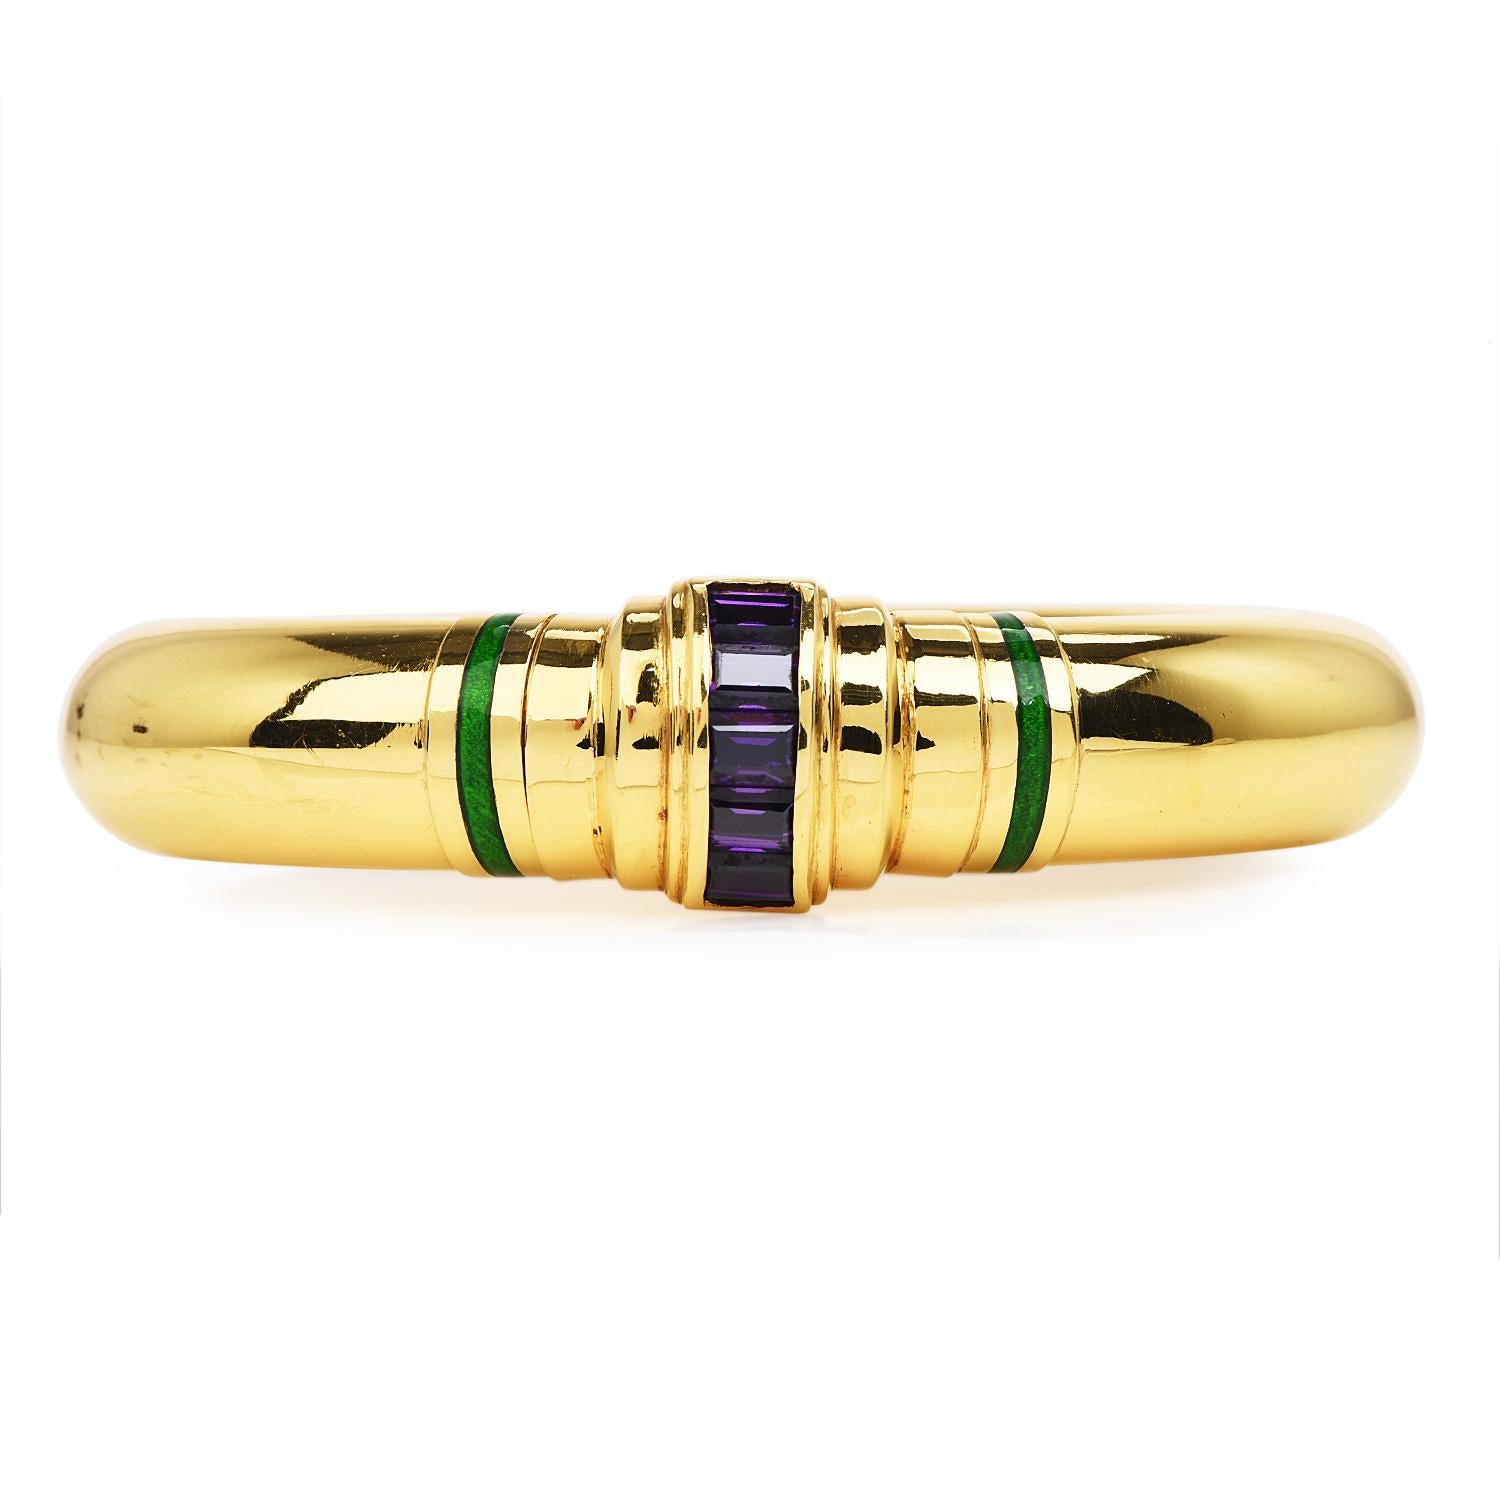 A bold exquisite bracelet is full of power and distinction.

Dazzle yourself with this high-polished 18k Italian gold bangle bracelet, accented to exquisite green enamel lines.

This wide Bangle bracelet is set with five emerald-cut genuine